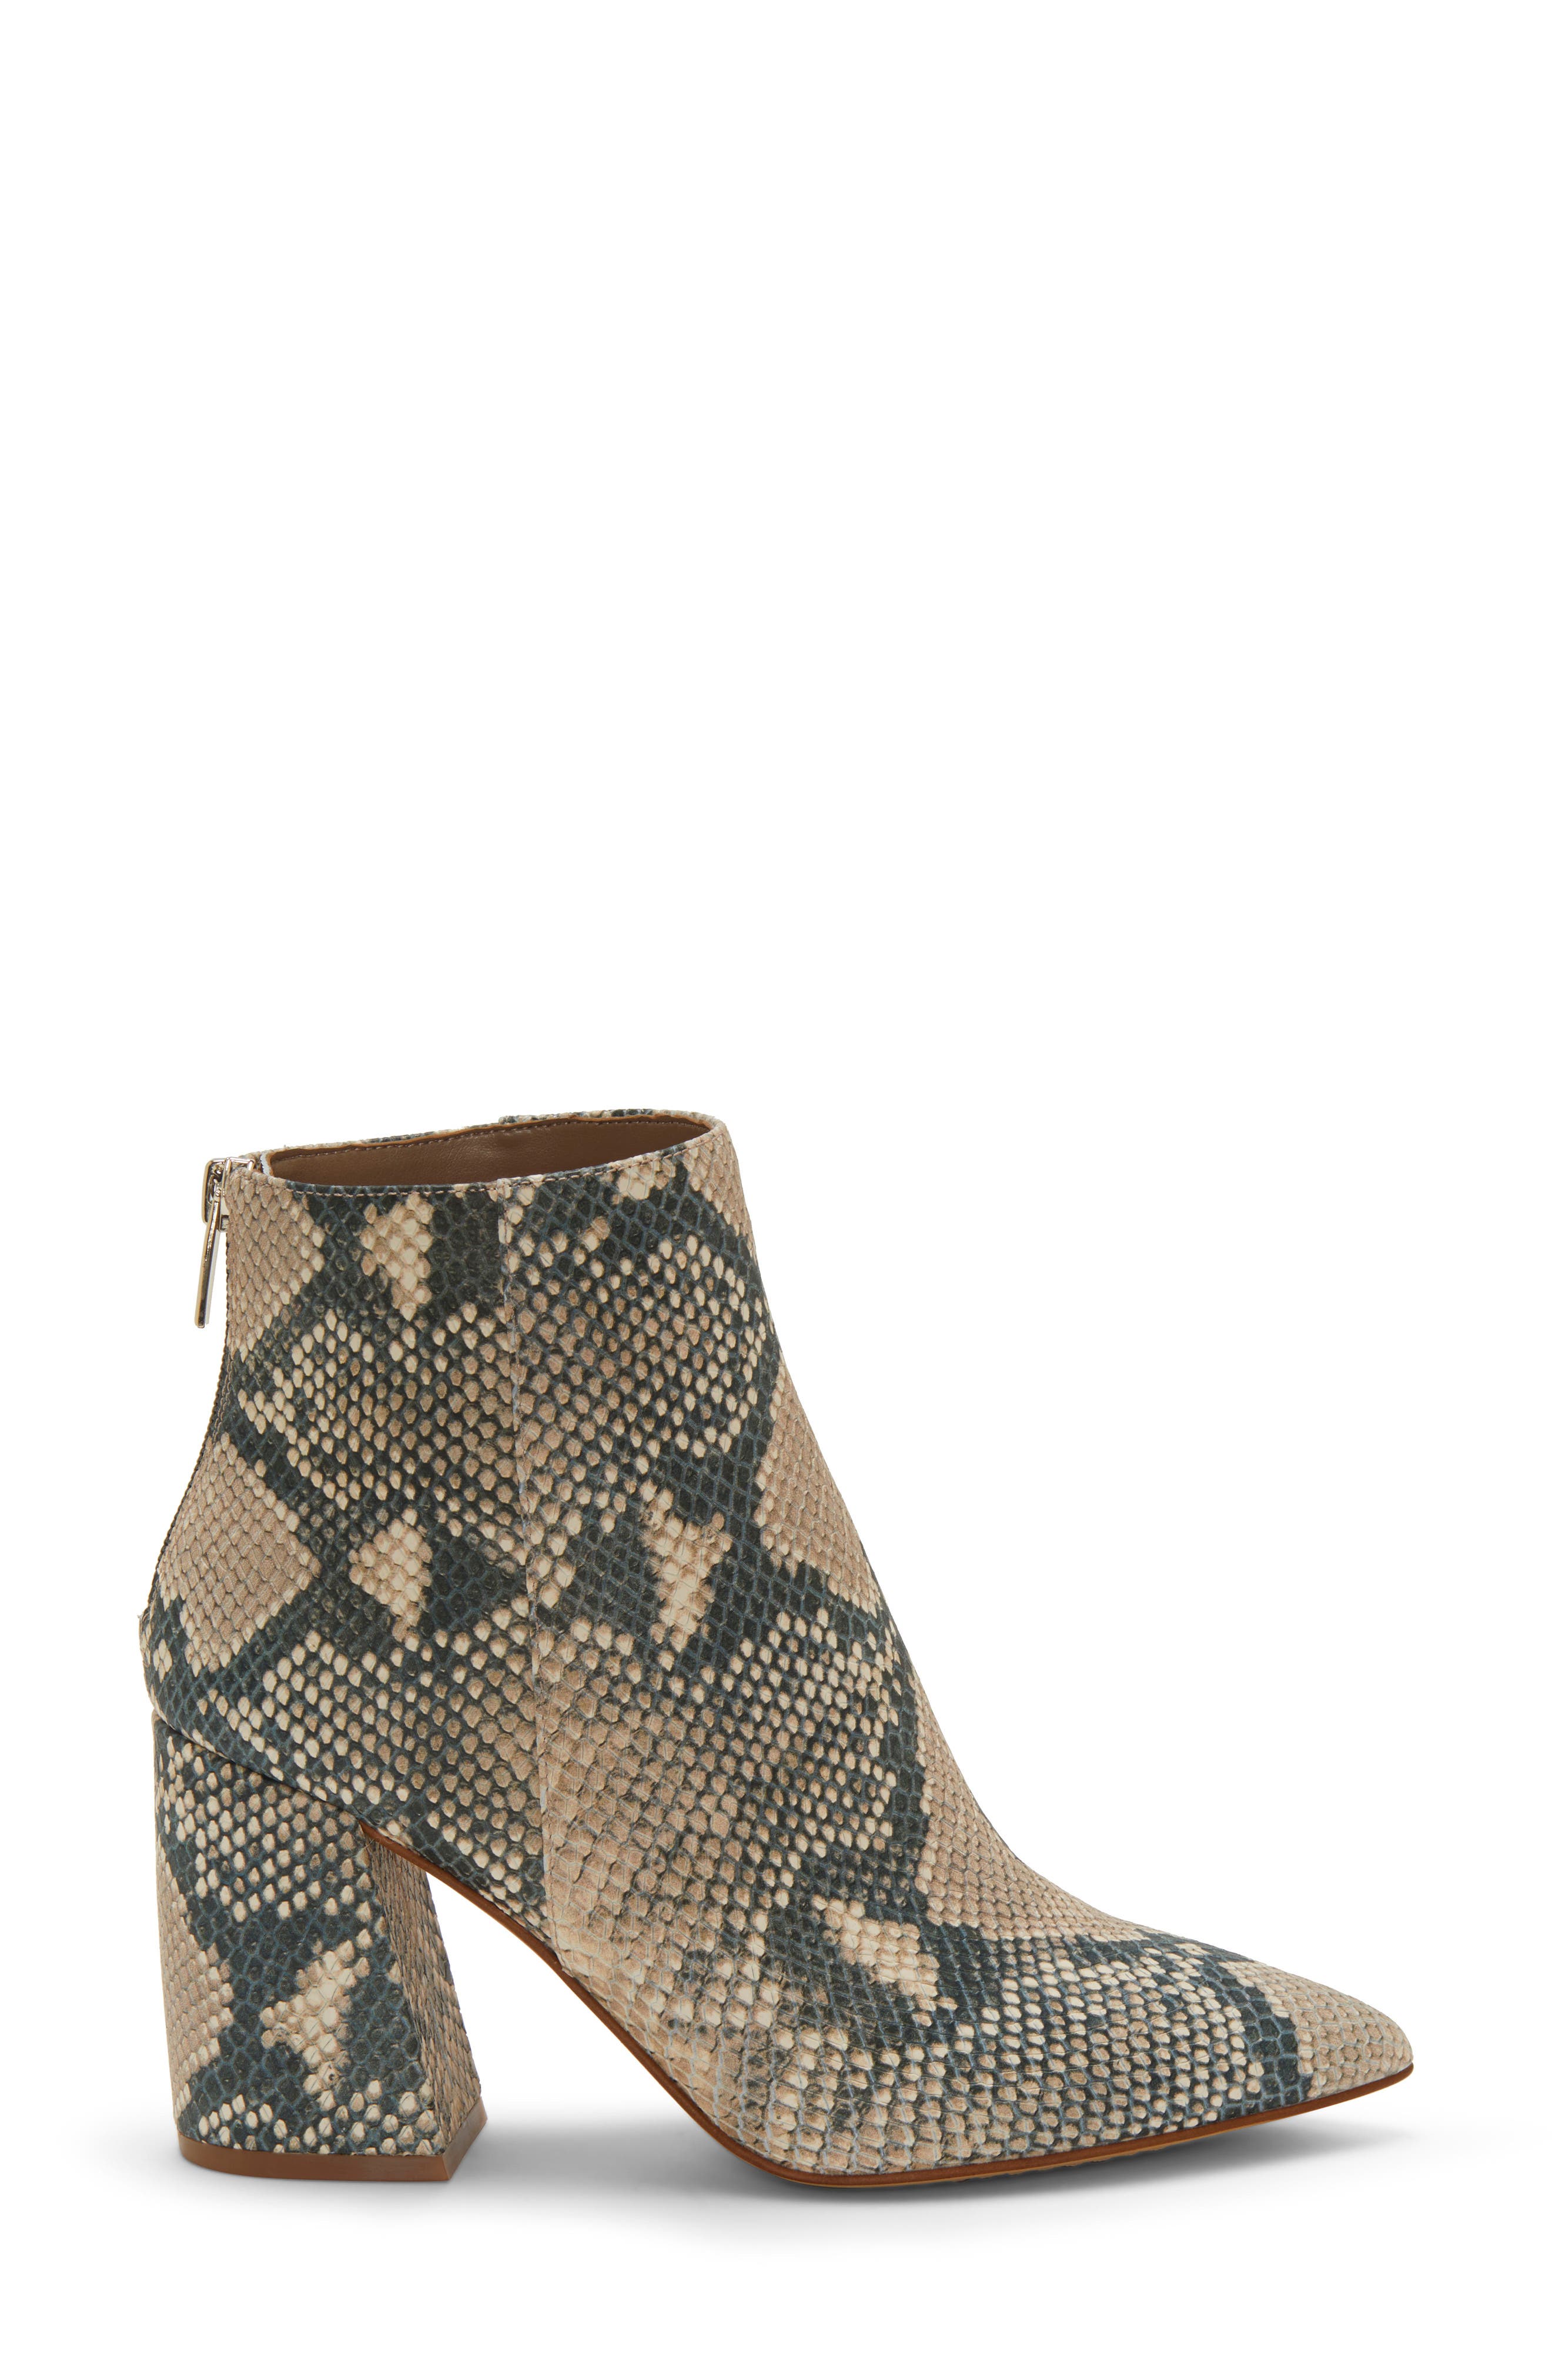 vince camuto pointed toe bootie